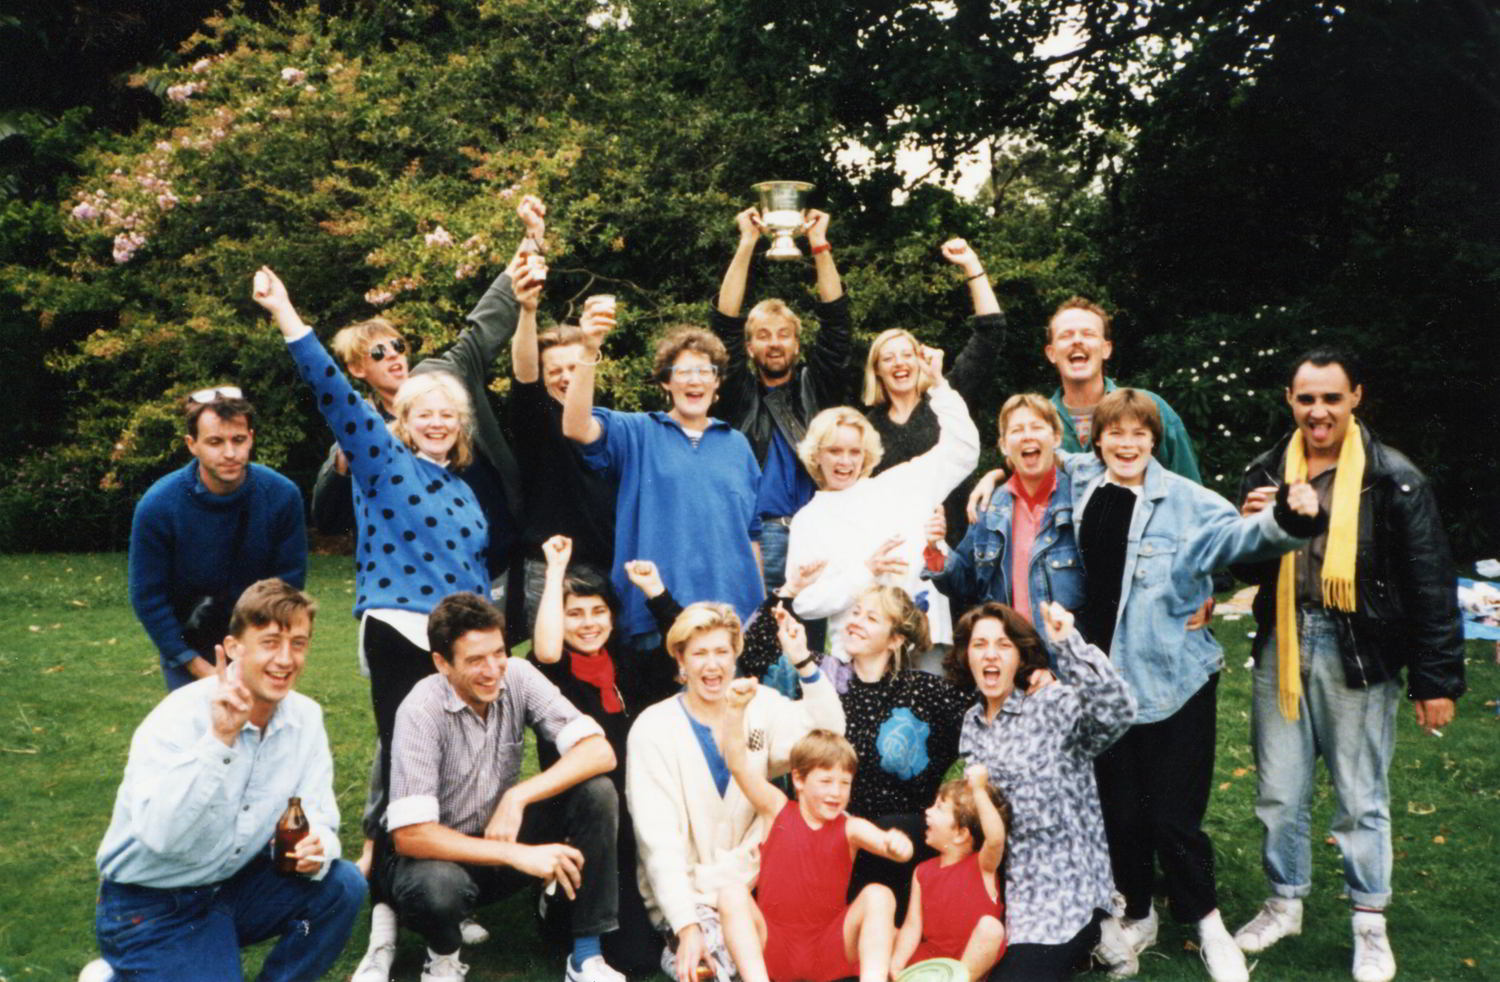 Handspan Theatre The Last Wave Moomba Award 1987 group photo of people in a park with trophy cup held aloft